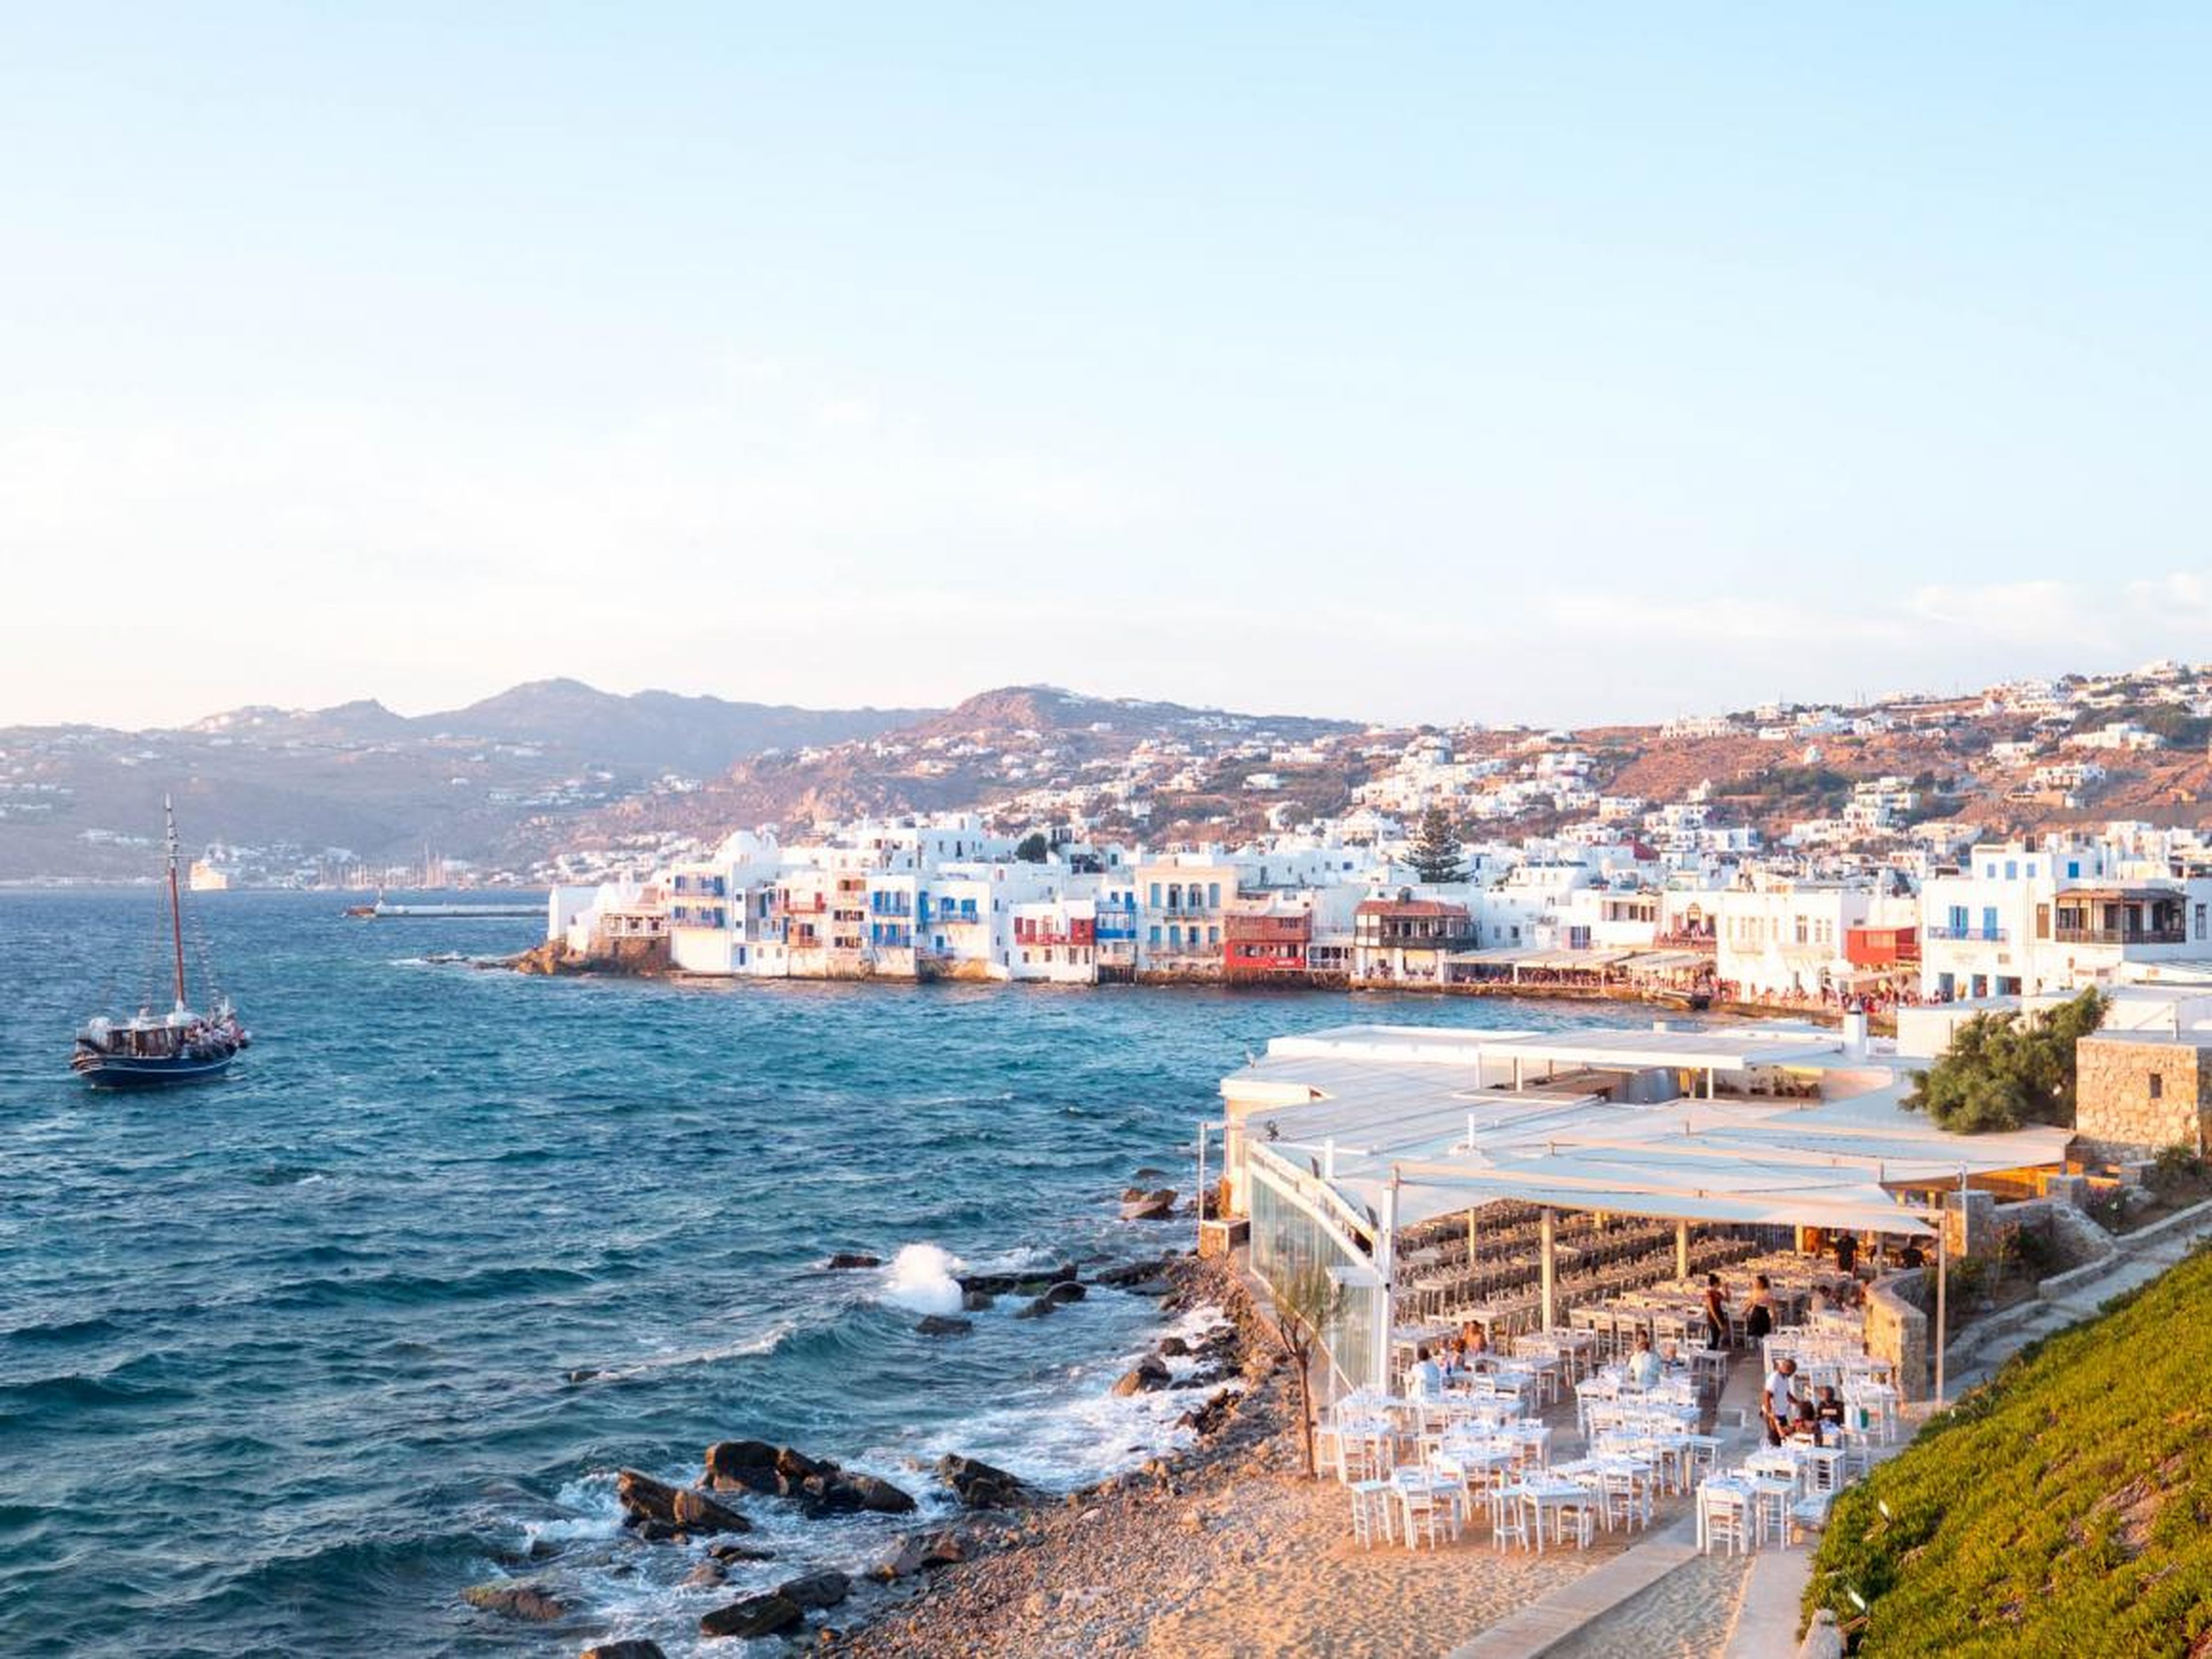 Measuring just 33 square miles in size, Mykonos is a sunny and cool Greek island stuffed with hip boutique hotels, thumping beach clubs, haute couture shops, white sandy beaches, whitewashed alleyways, and swanky restaurants.